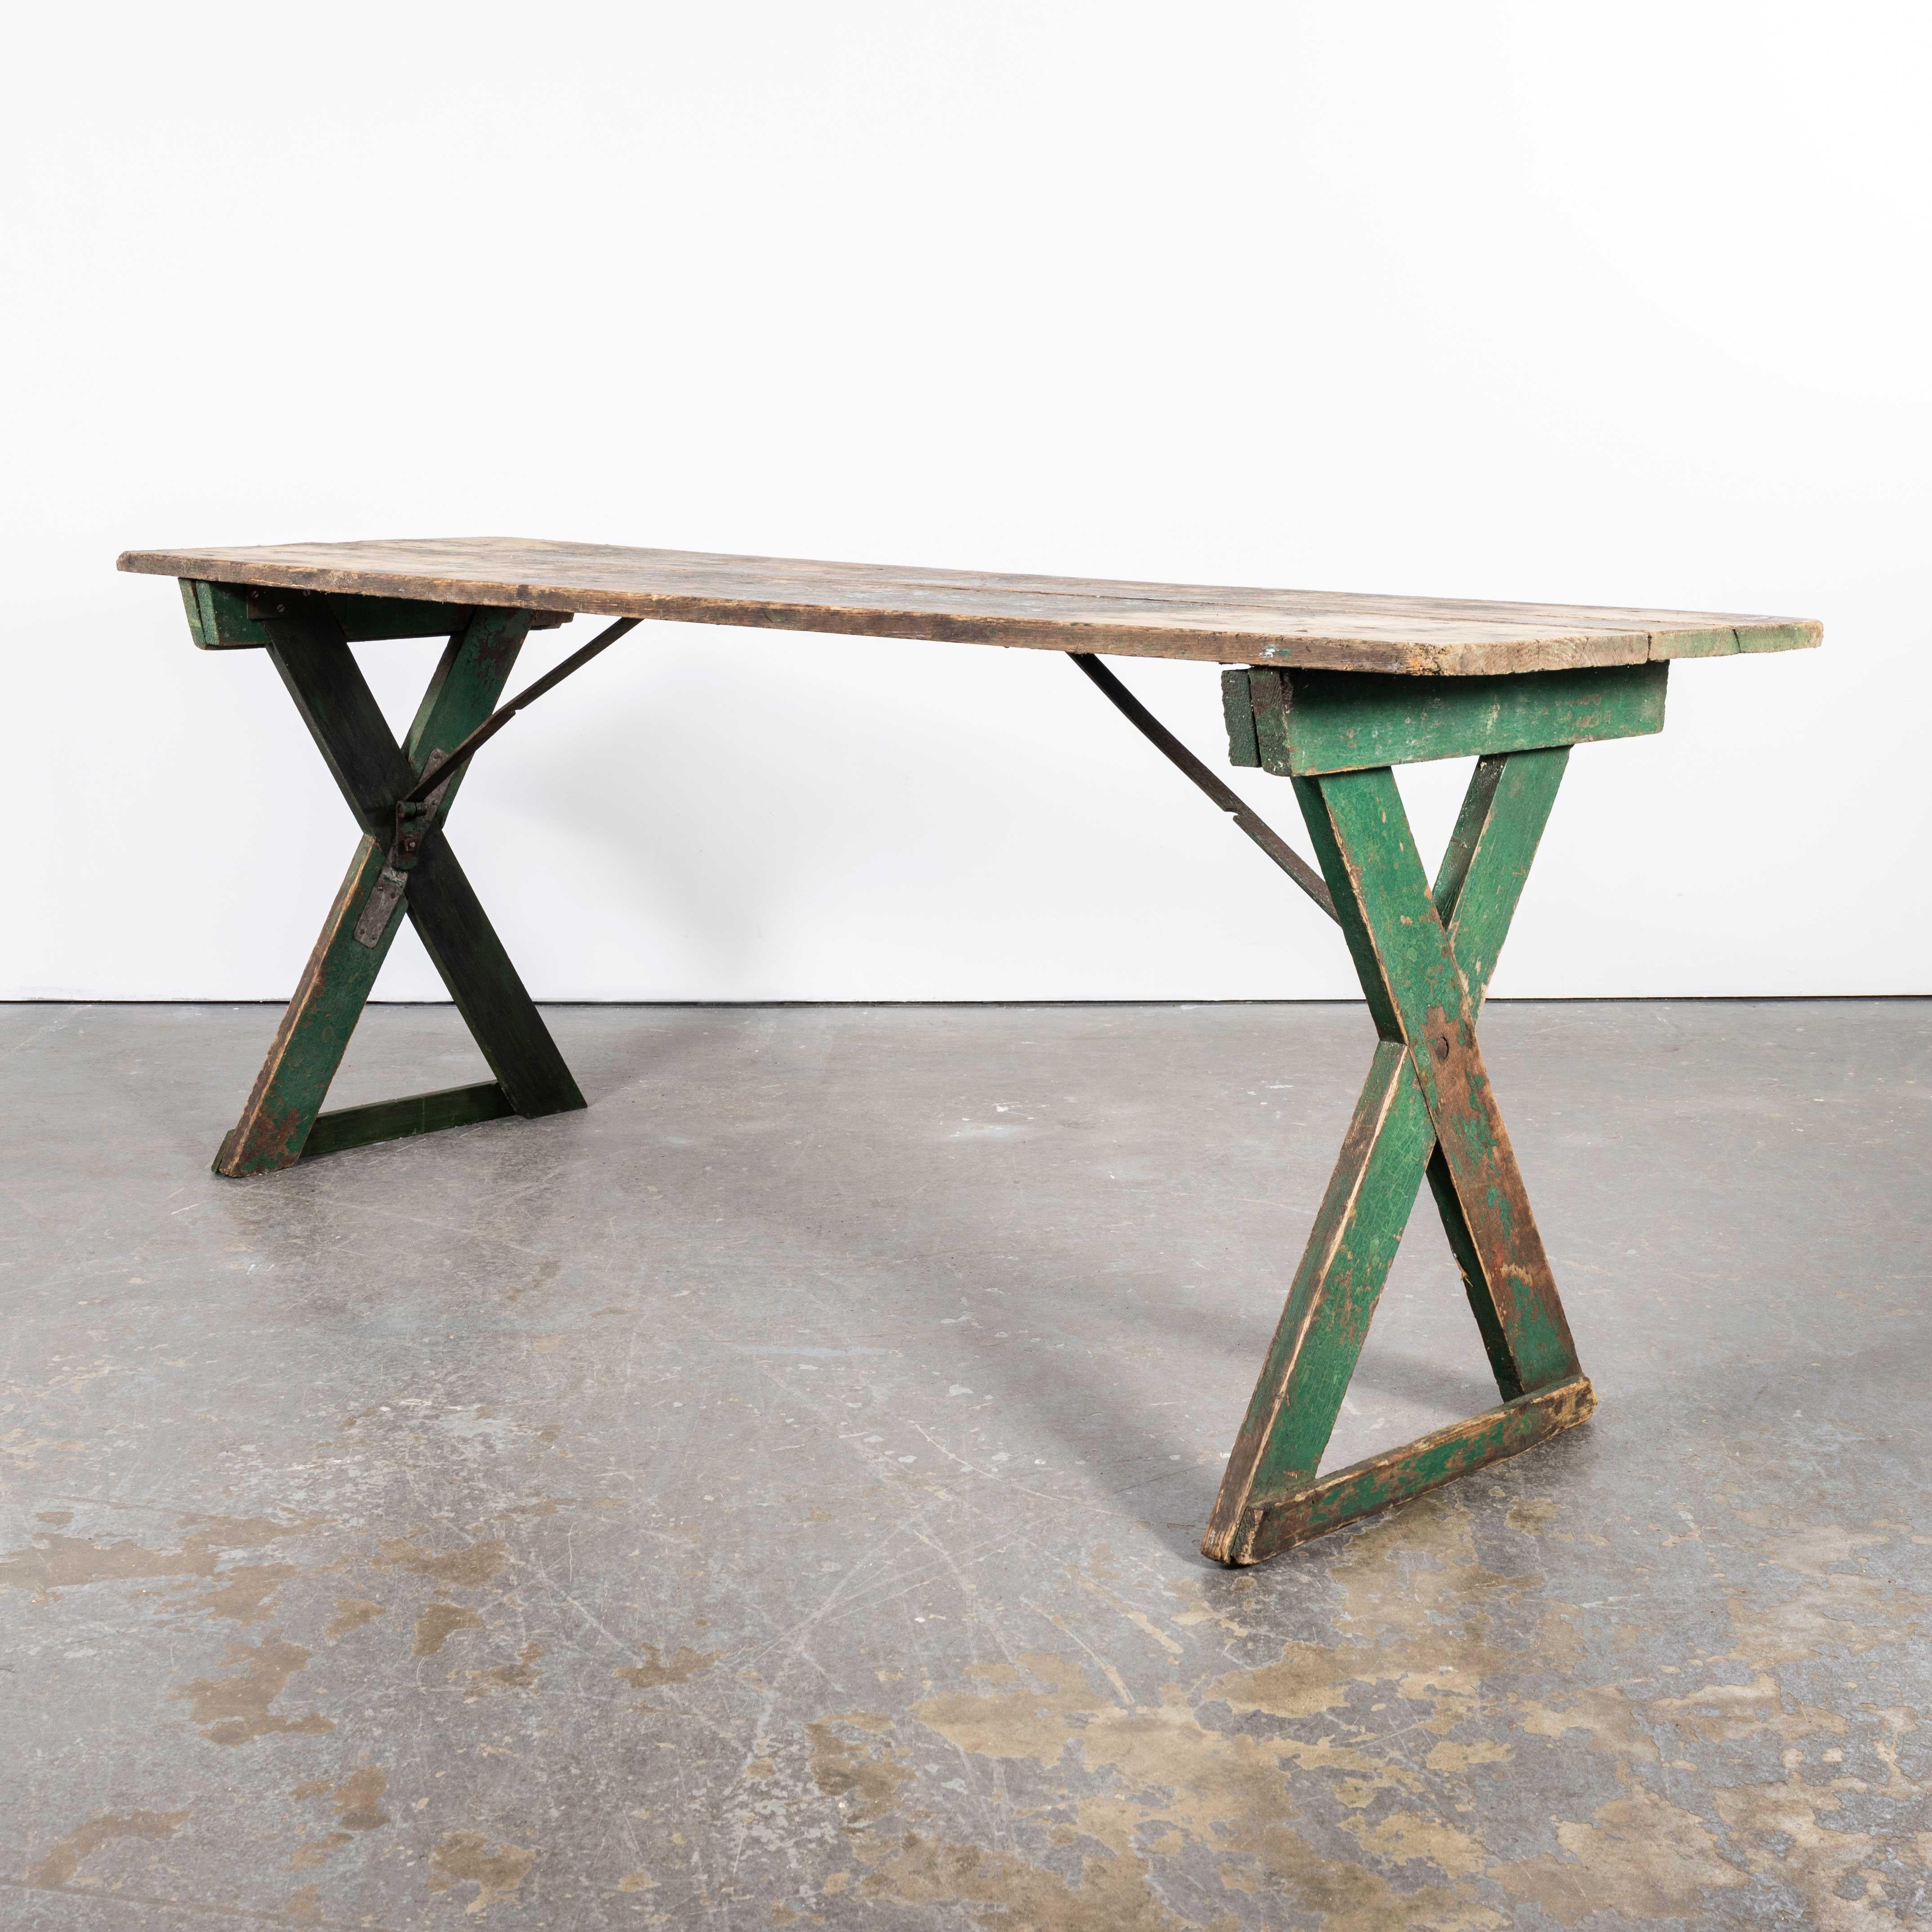 1950's Original French Farm Trestle Dining Table - Green For Sale 8